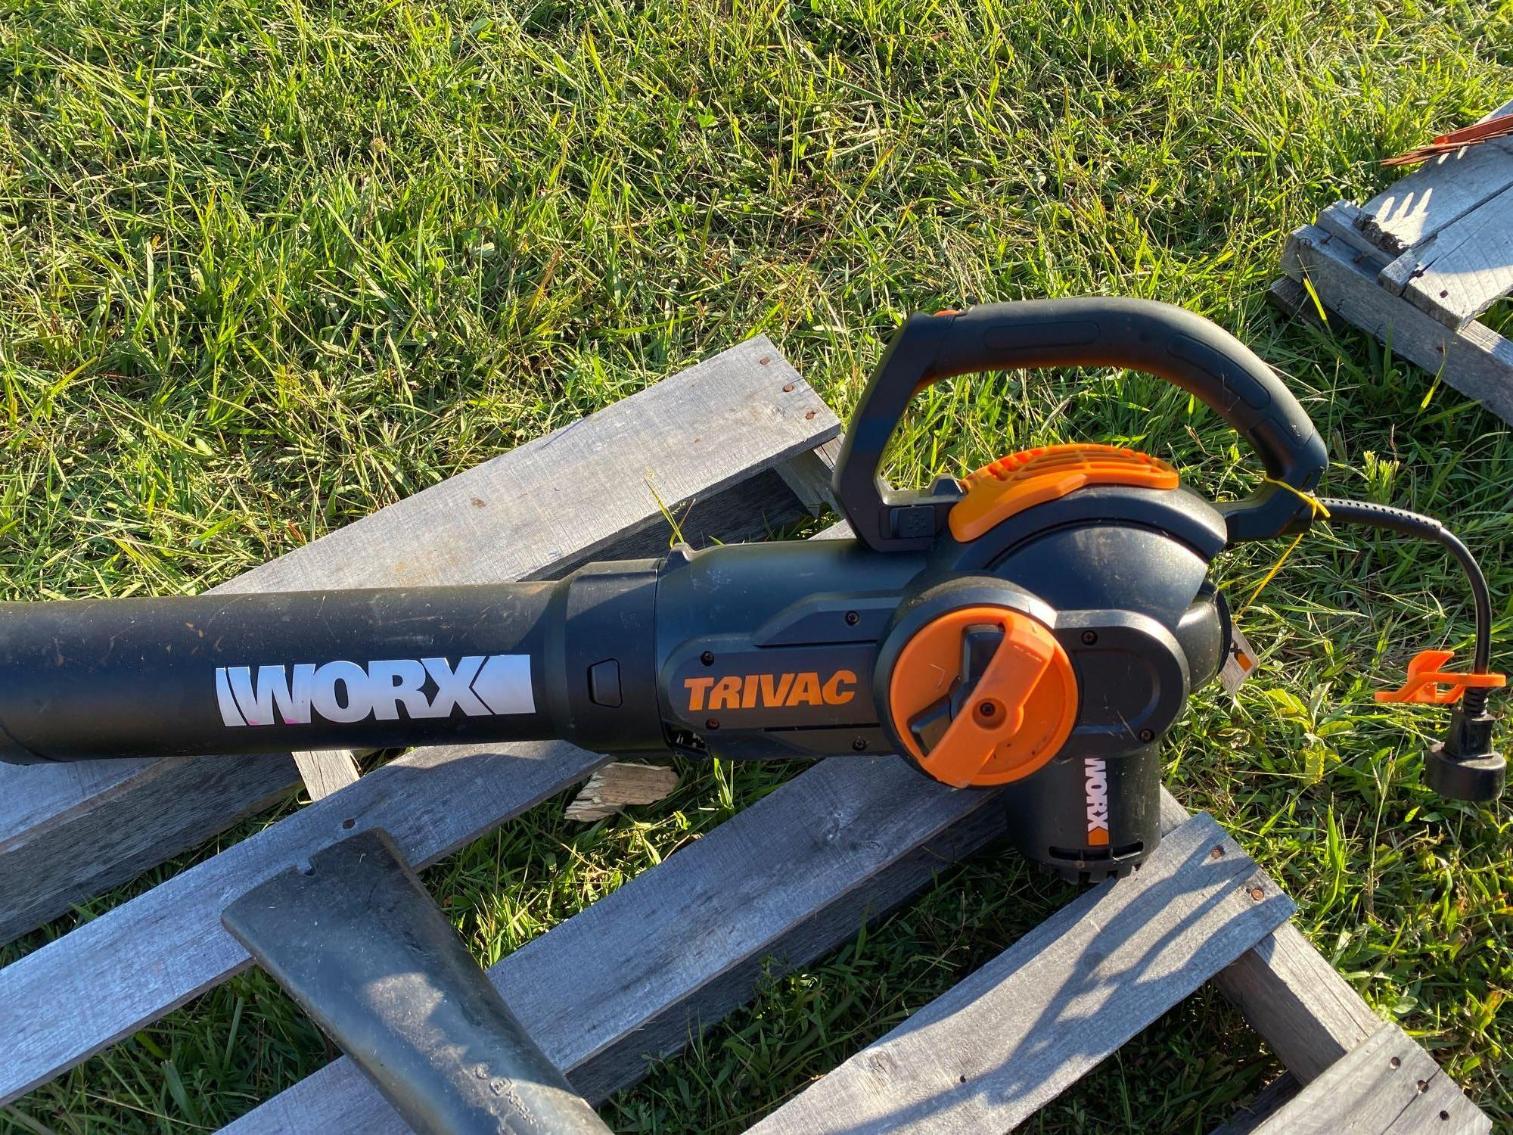 Image for Echo PB-255 LM Blower, 1 Worx Corded Blower